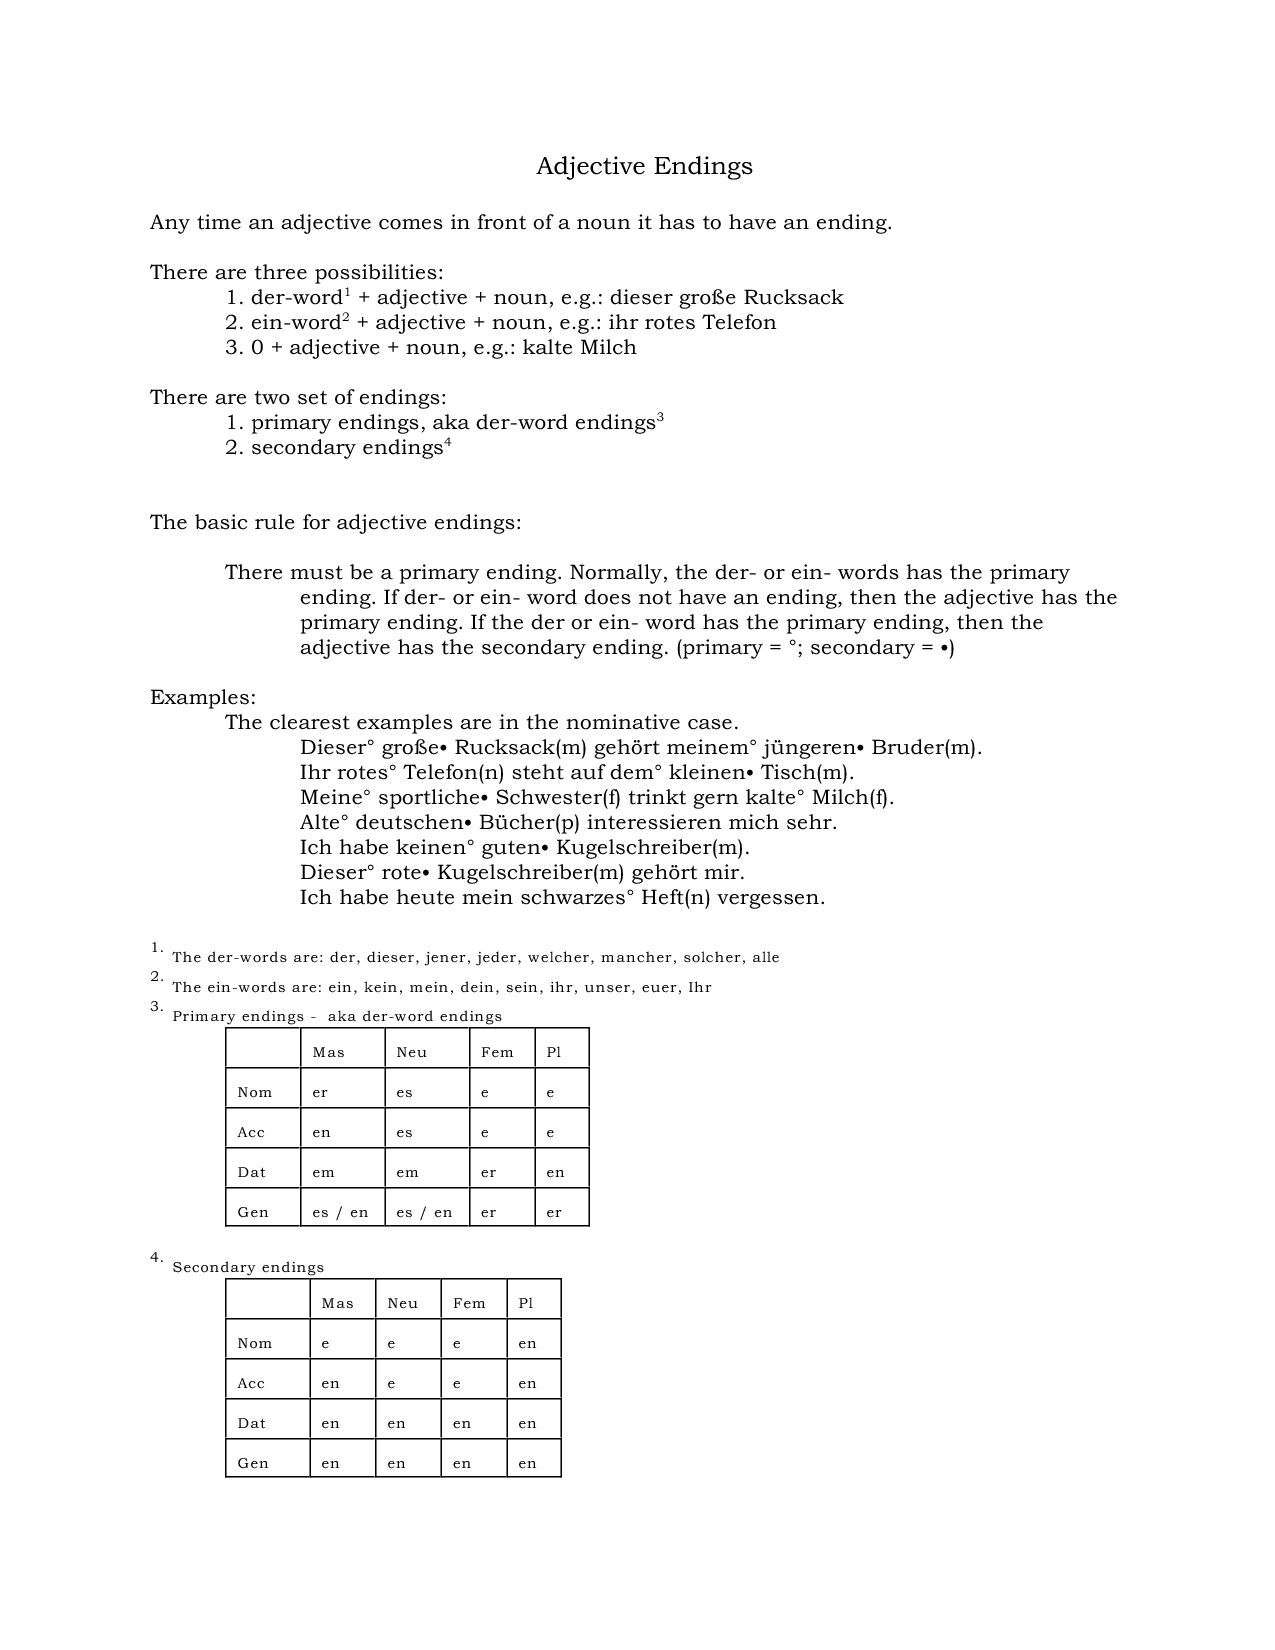 nouns-nominative-and-objective-case-worksheet-in-2022-nouns-simple-past-tense-antonym